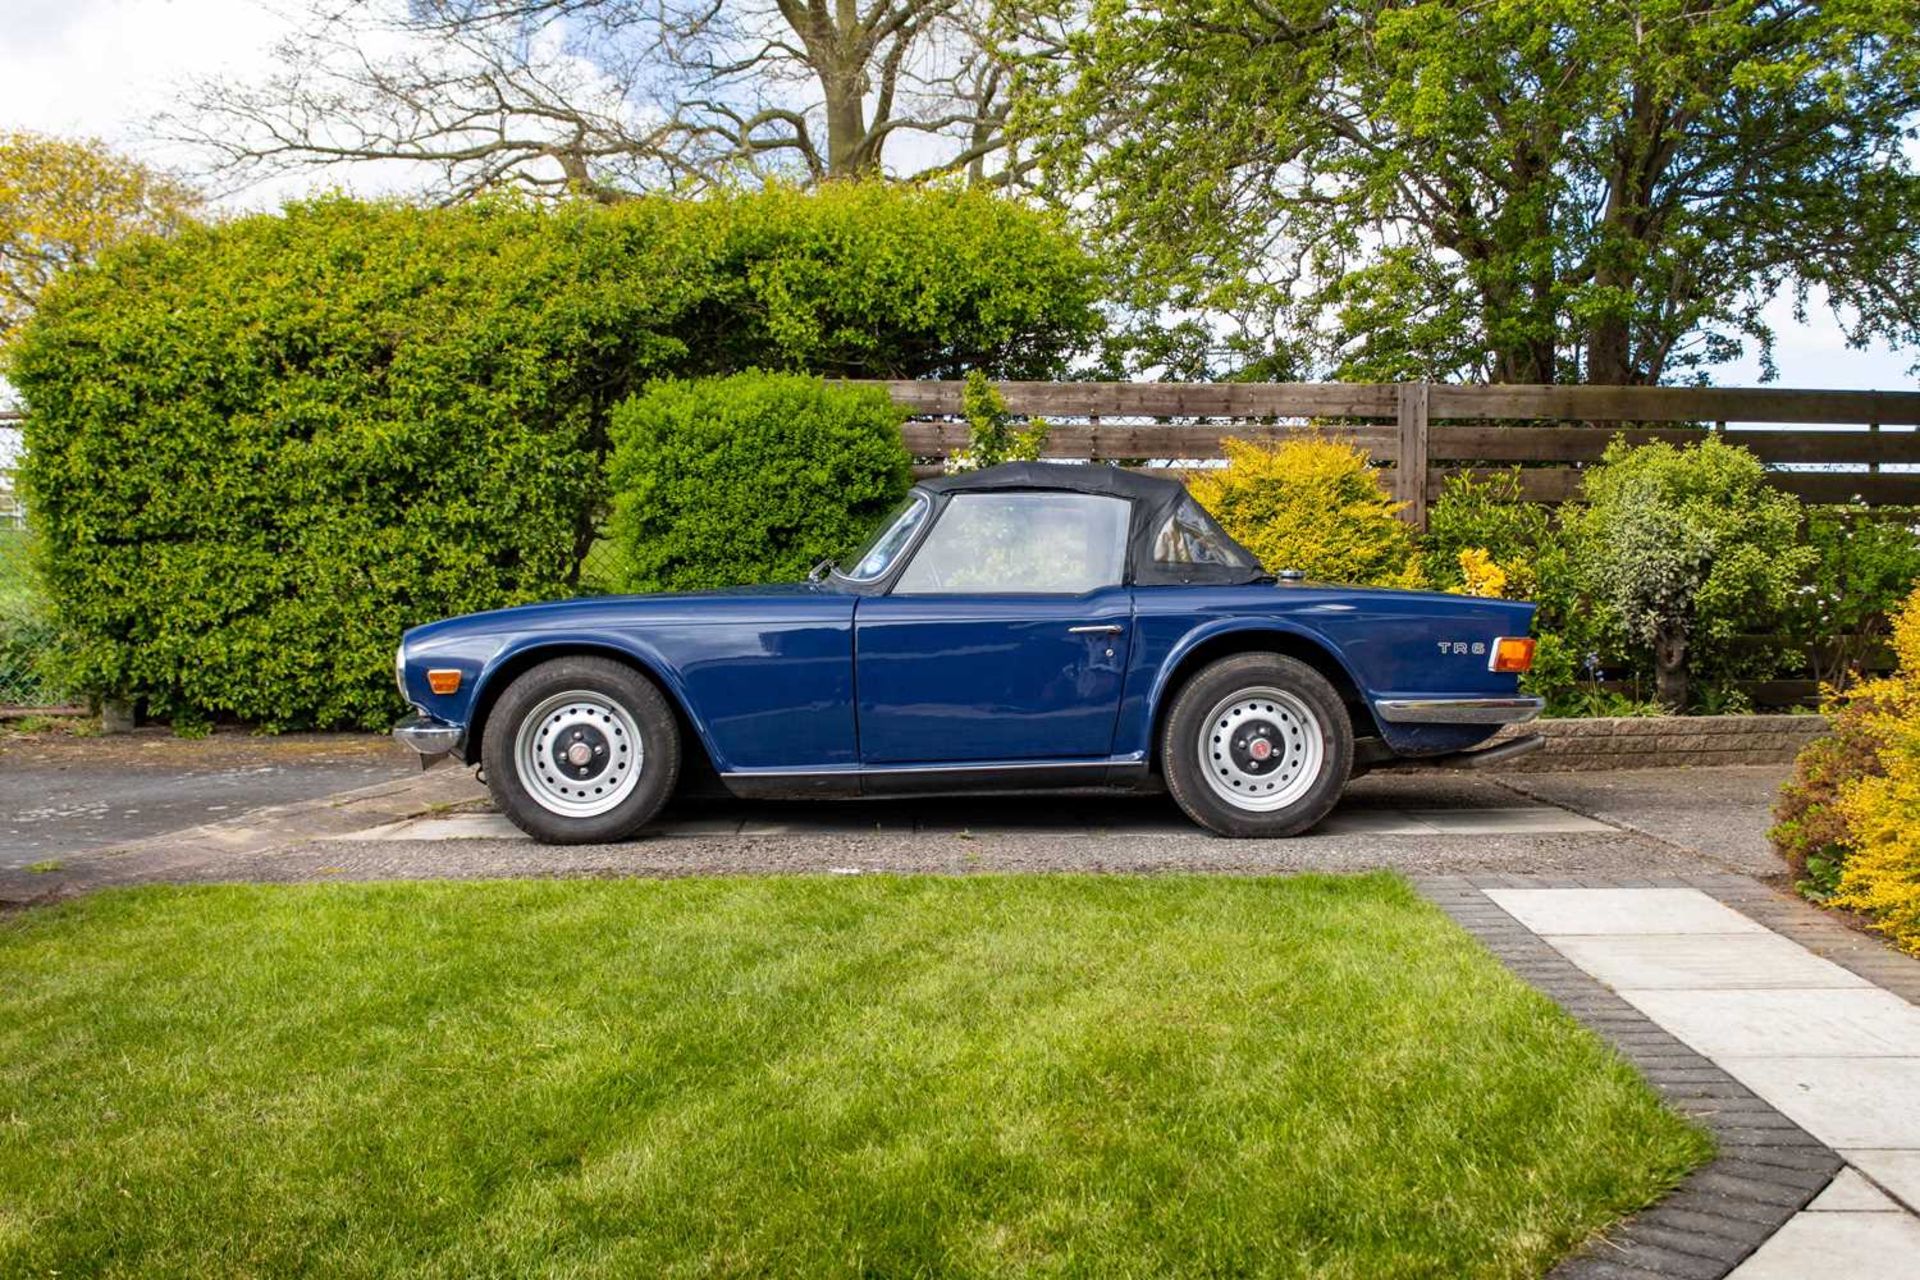 1972 Triumph TR6 Home market example, specified with manual overdrive transmission - Image 11 of 95